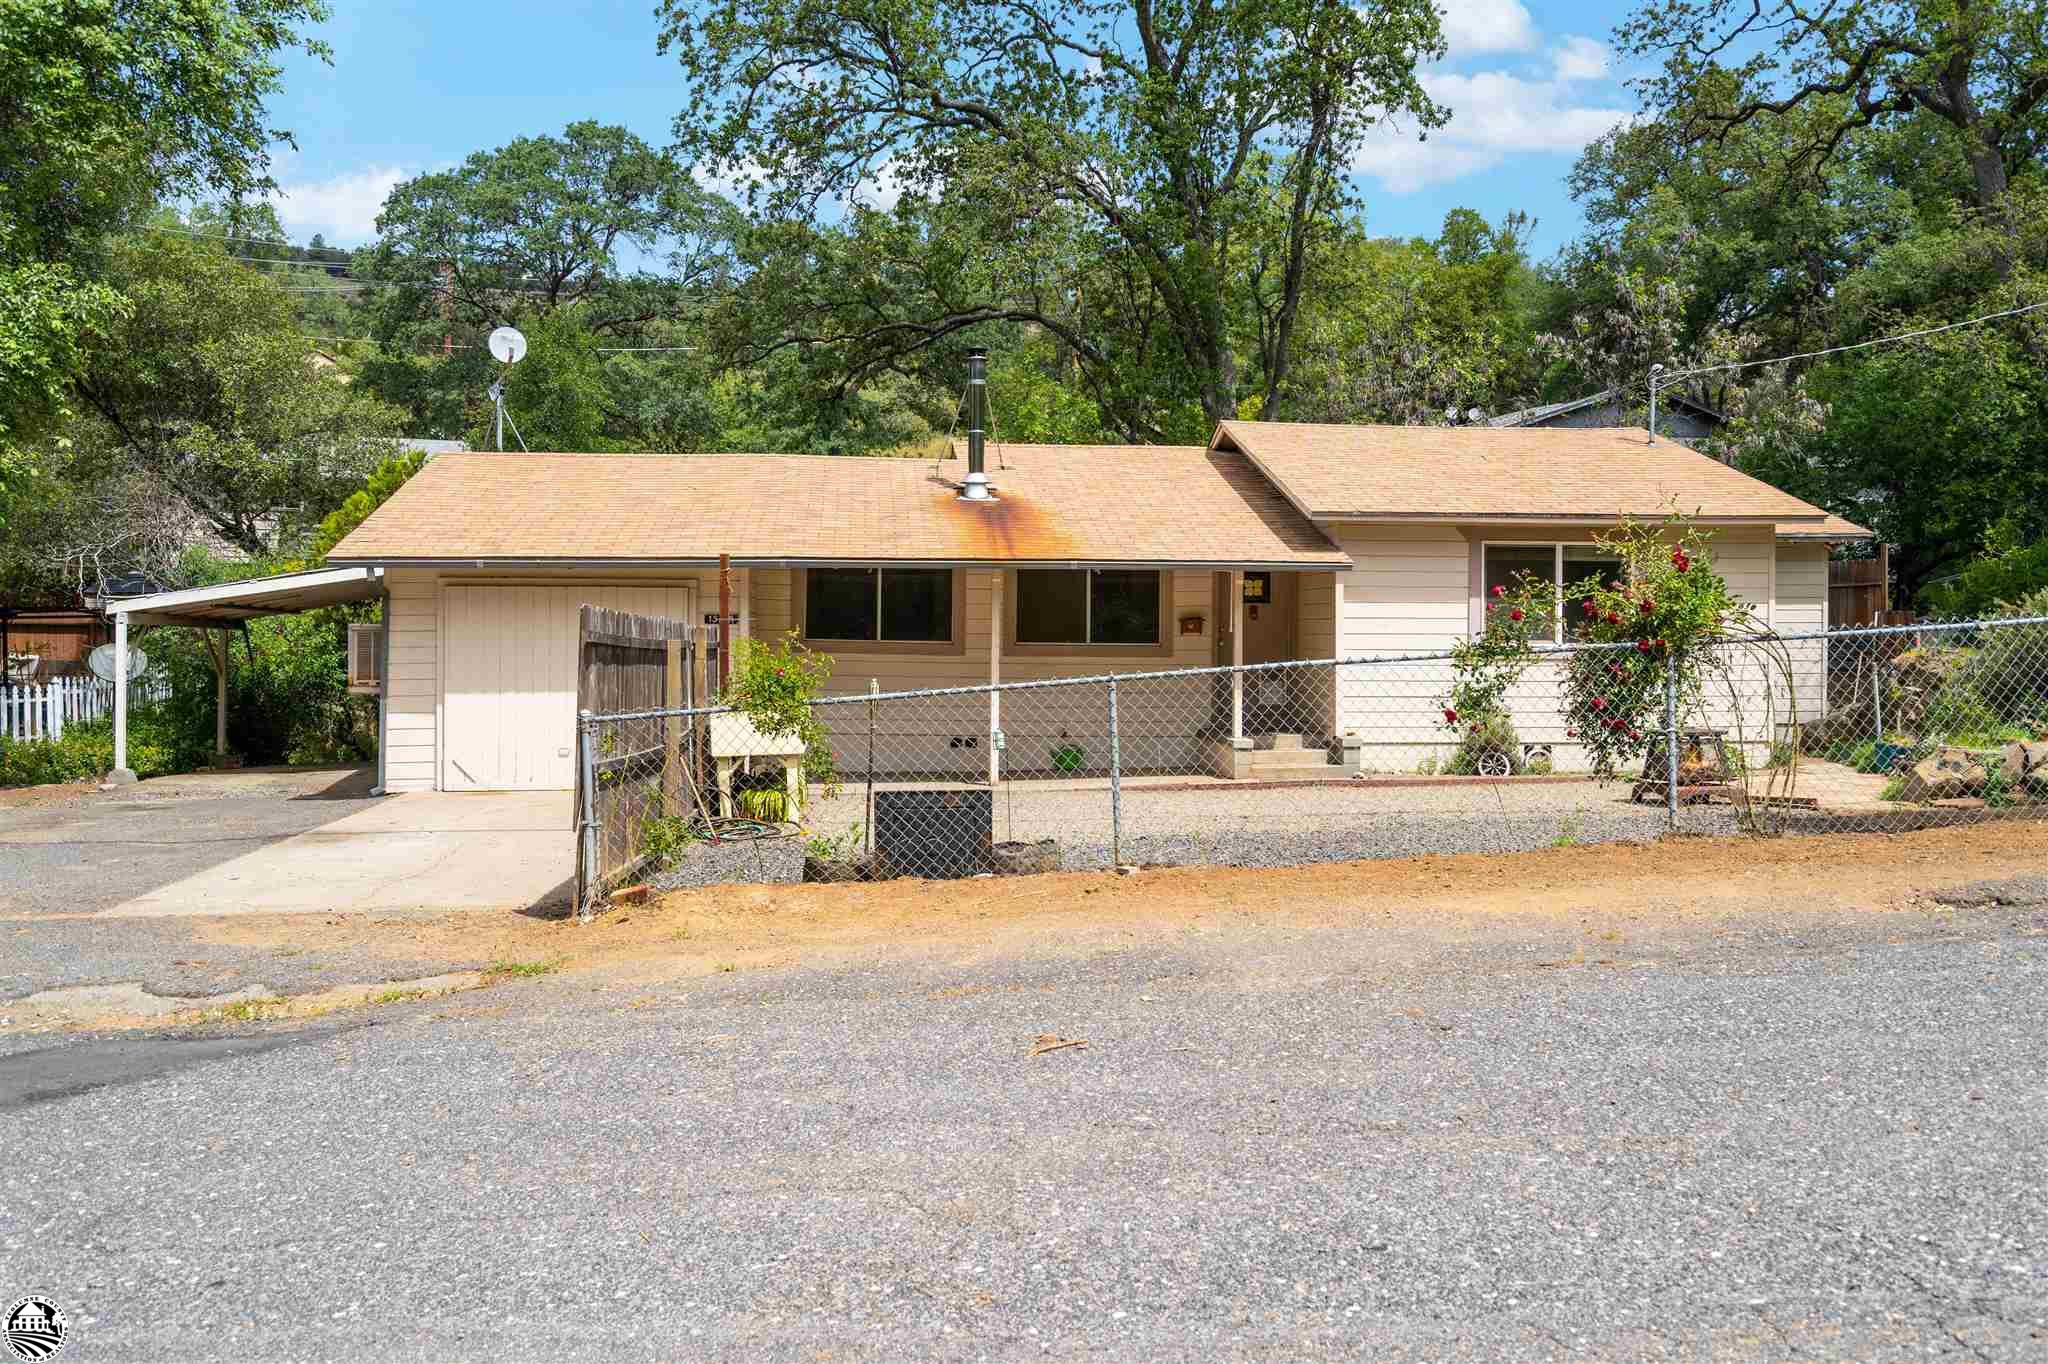 15518 Jenness Rd., Sonora, CA 95370